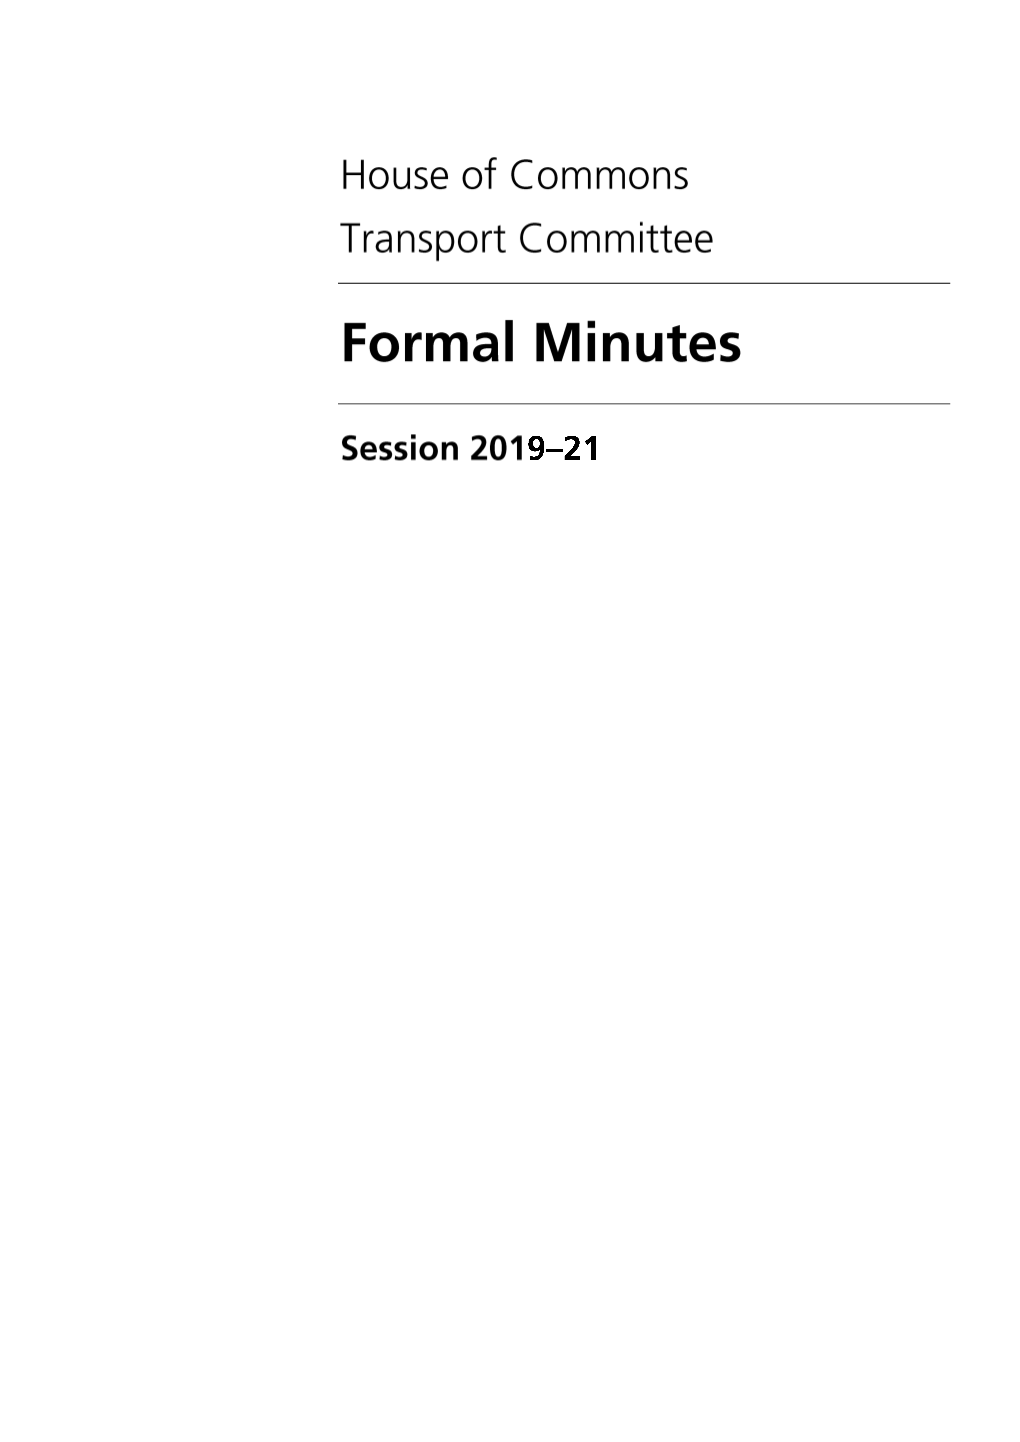 Transport Committee Formal Minutes 2019-21